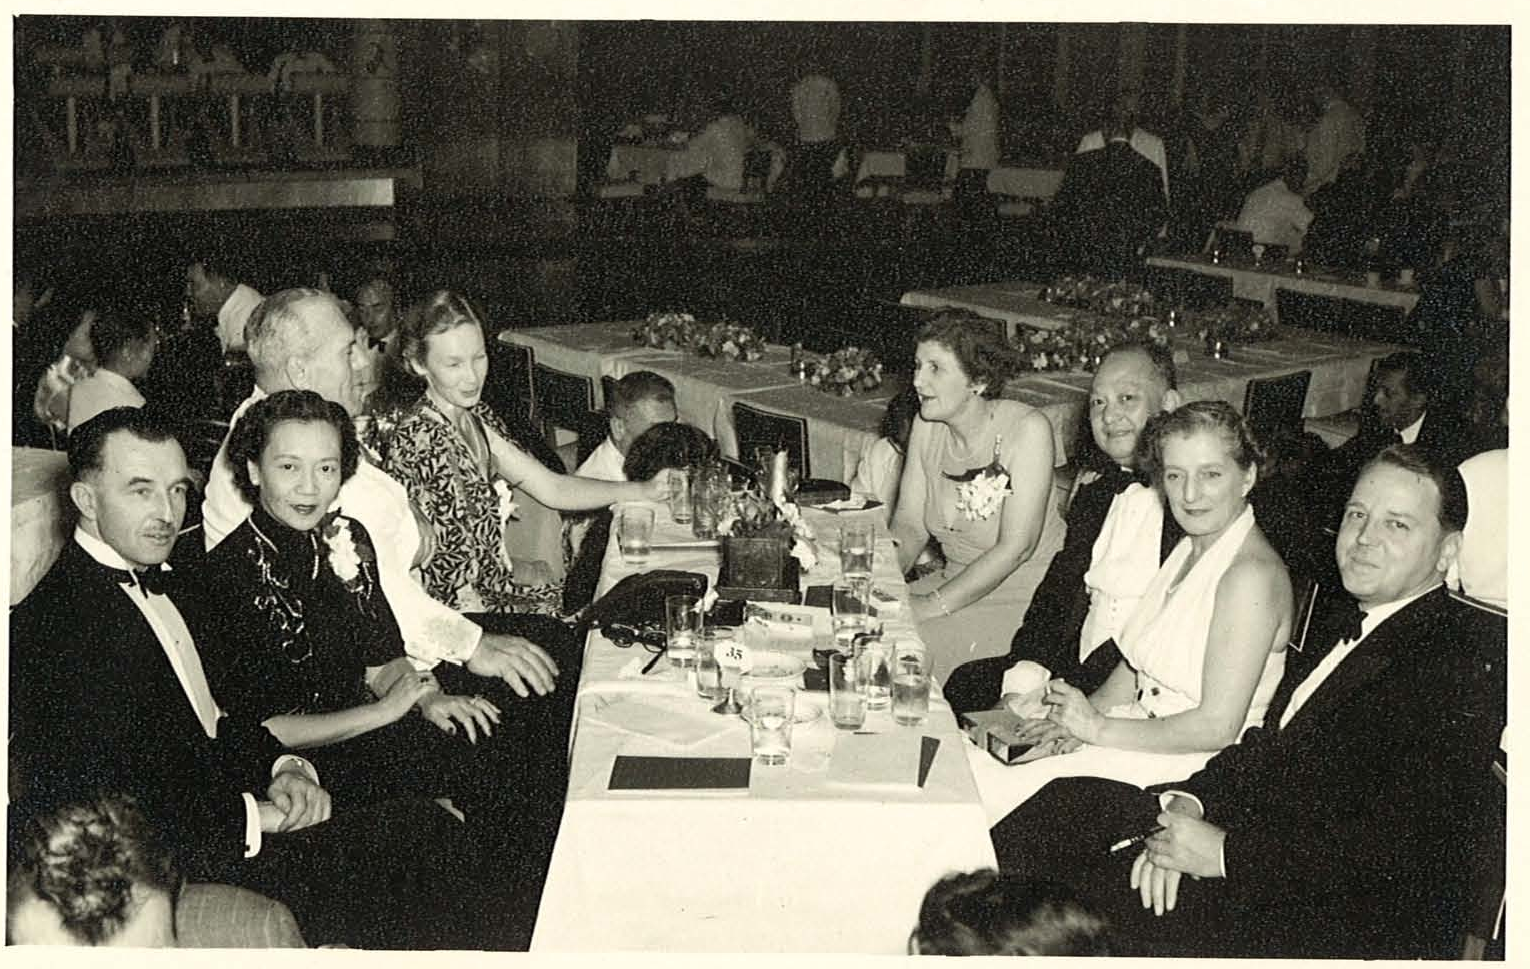 Max (front right) and Audrey (back left) have dinner with friends at Luna Park, 1950